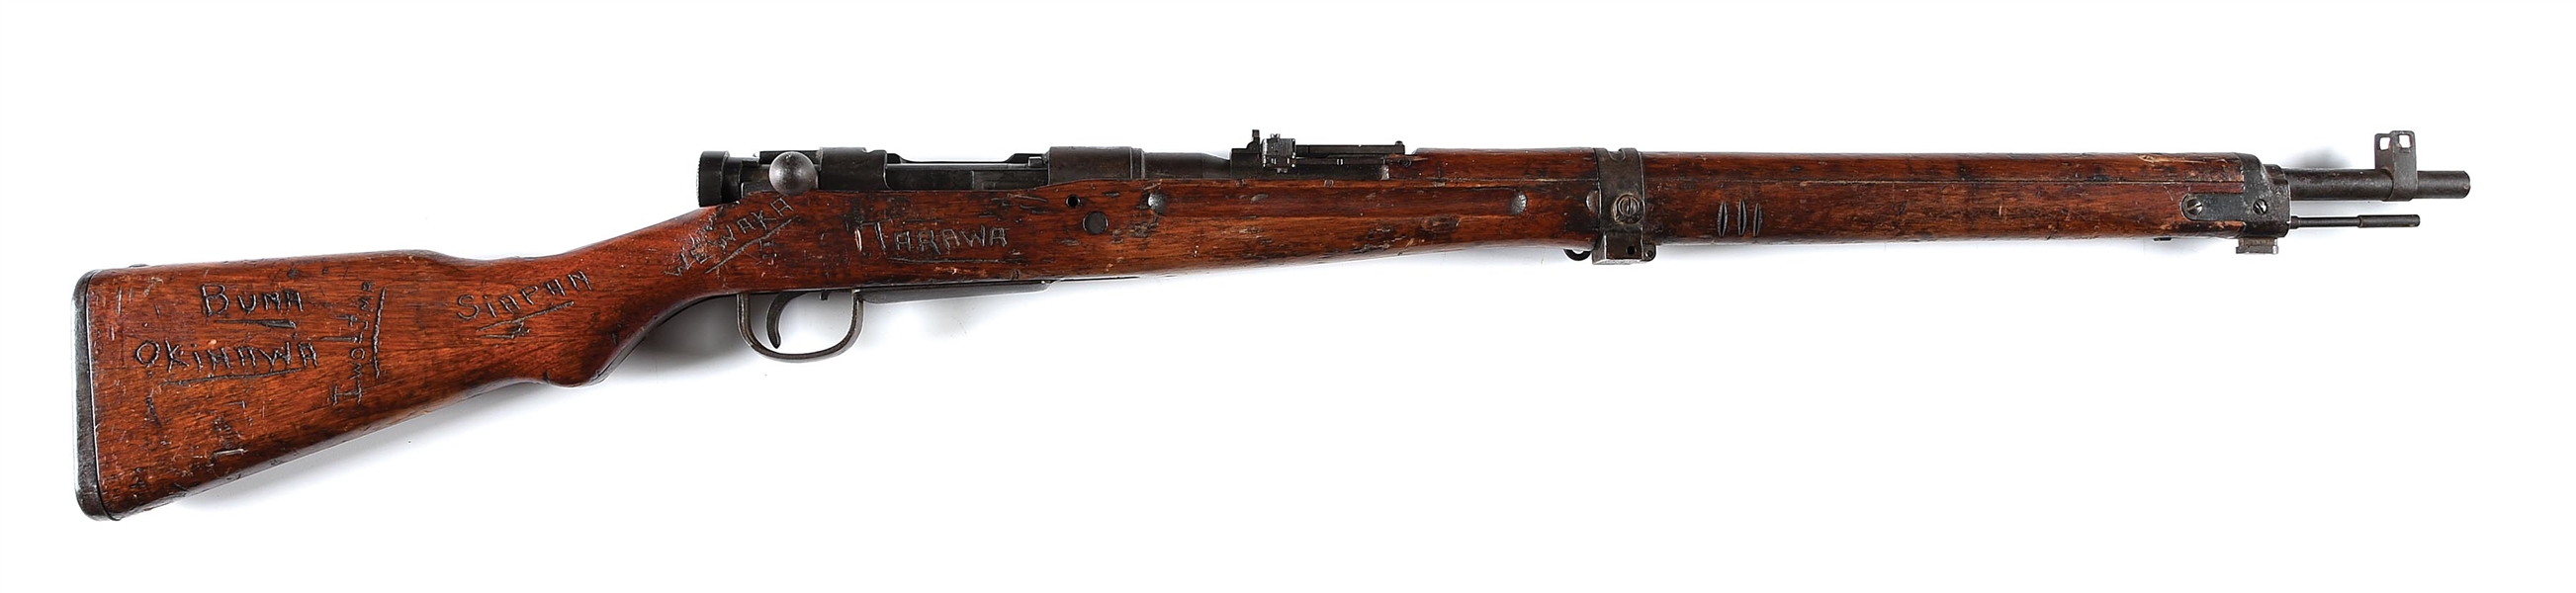 (C) KOKURA TYPE 99 BOLT ACTION RIFLE WITH GI CARVED STOCK.